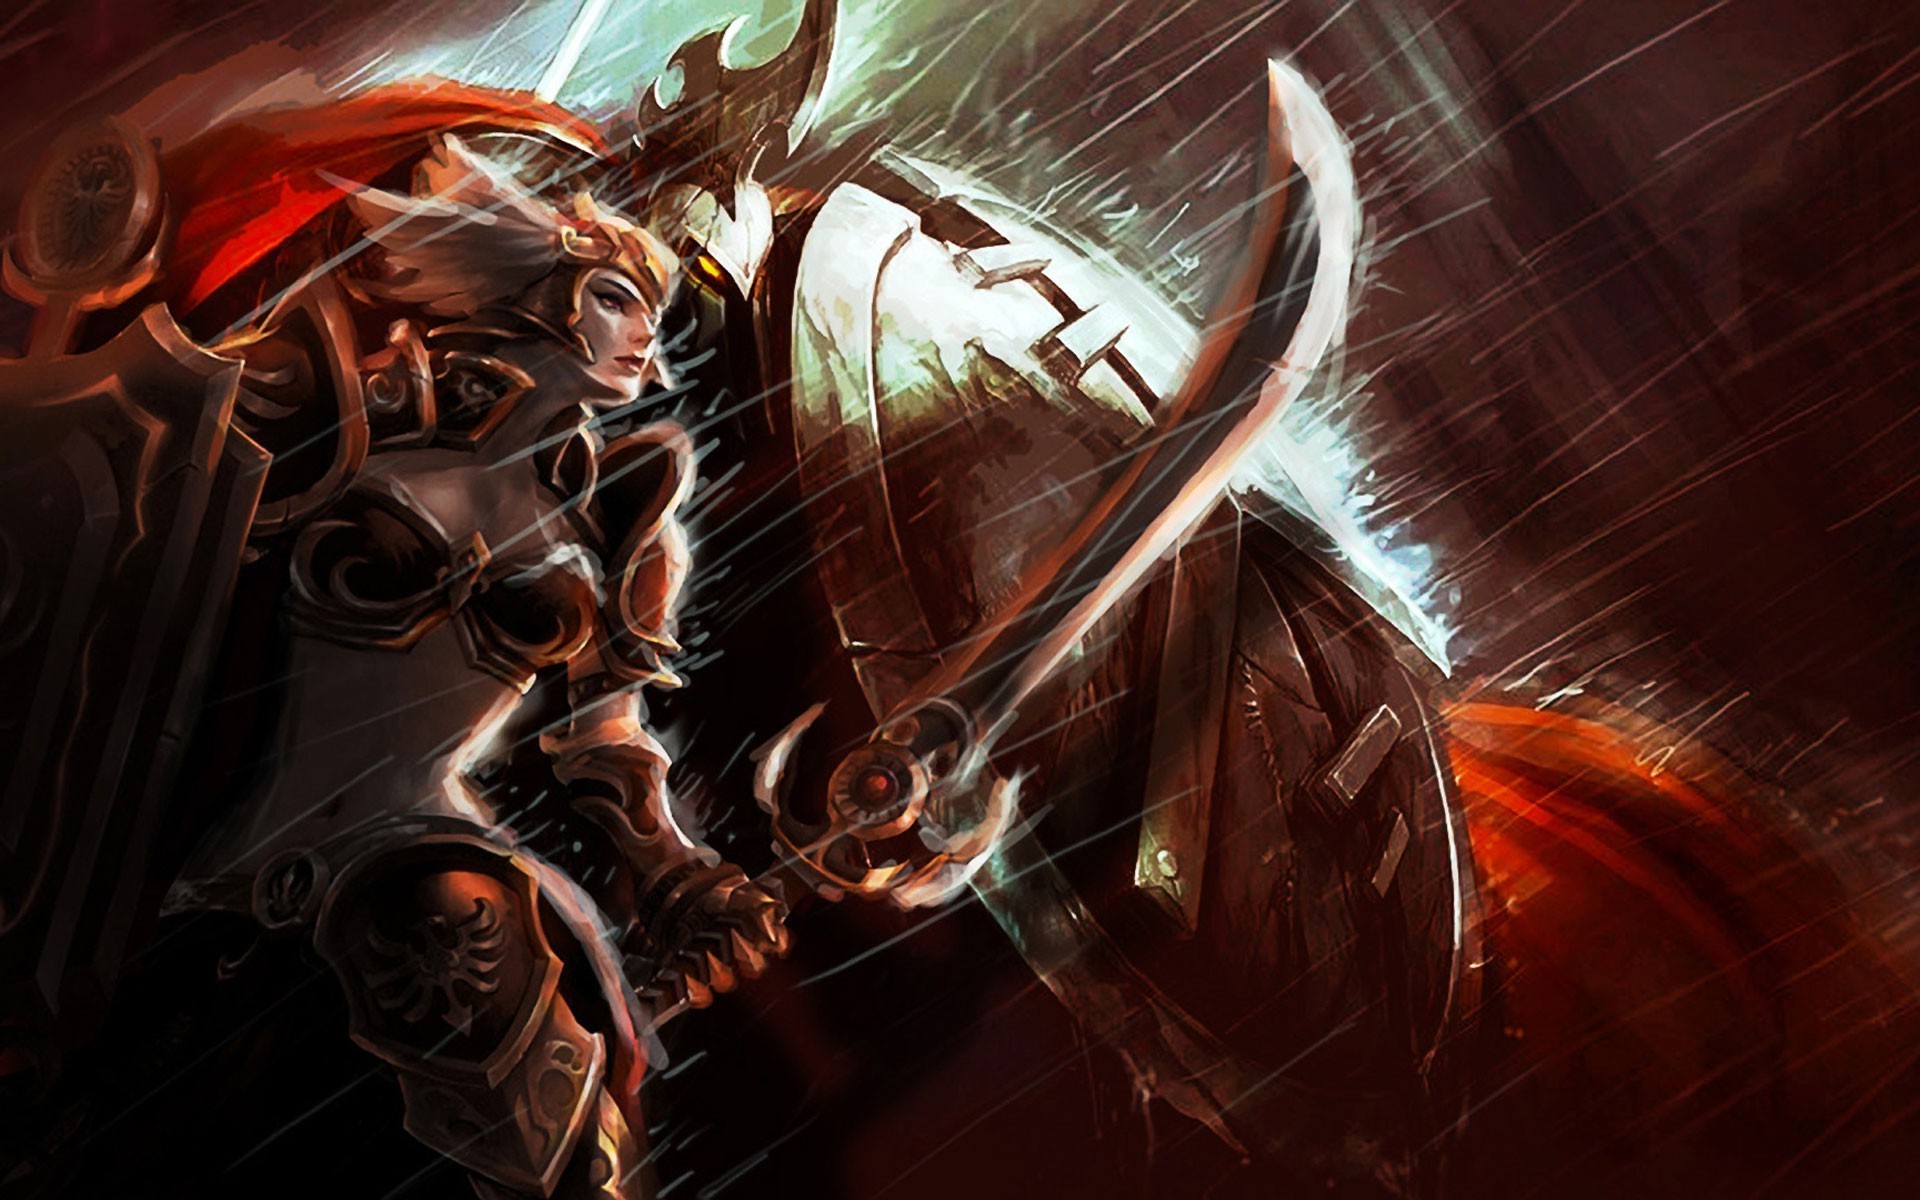 100+ Leona (League Of Legends) HD Wallpapers and Backgrounds